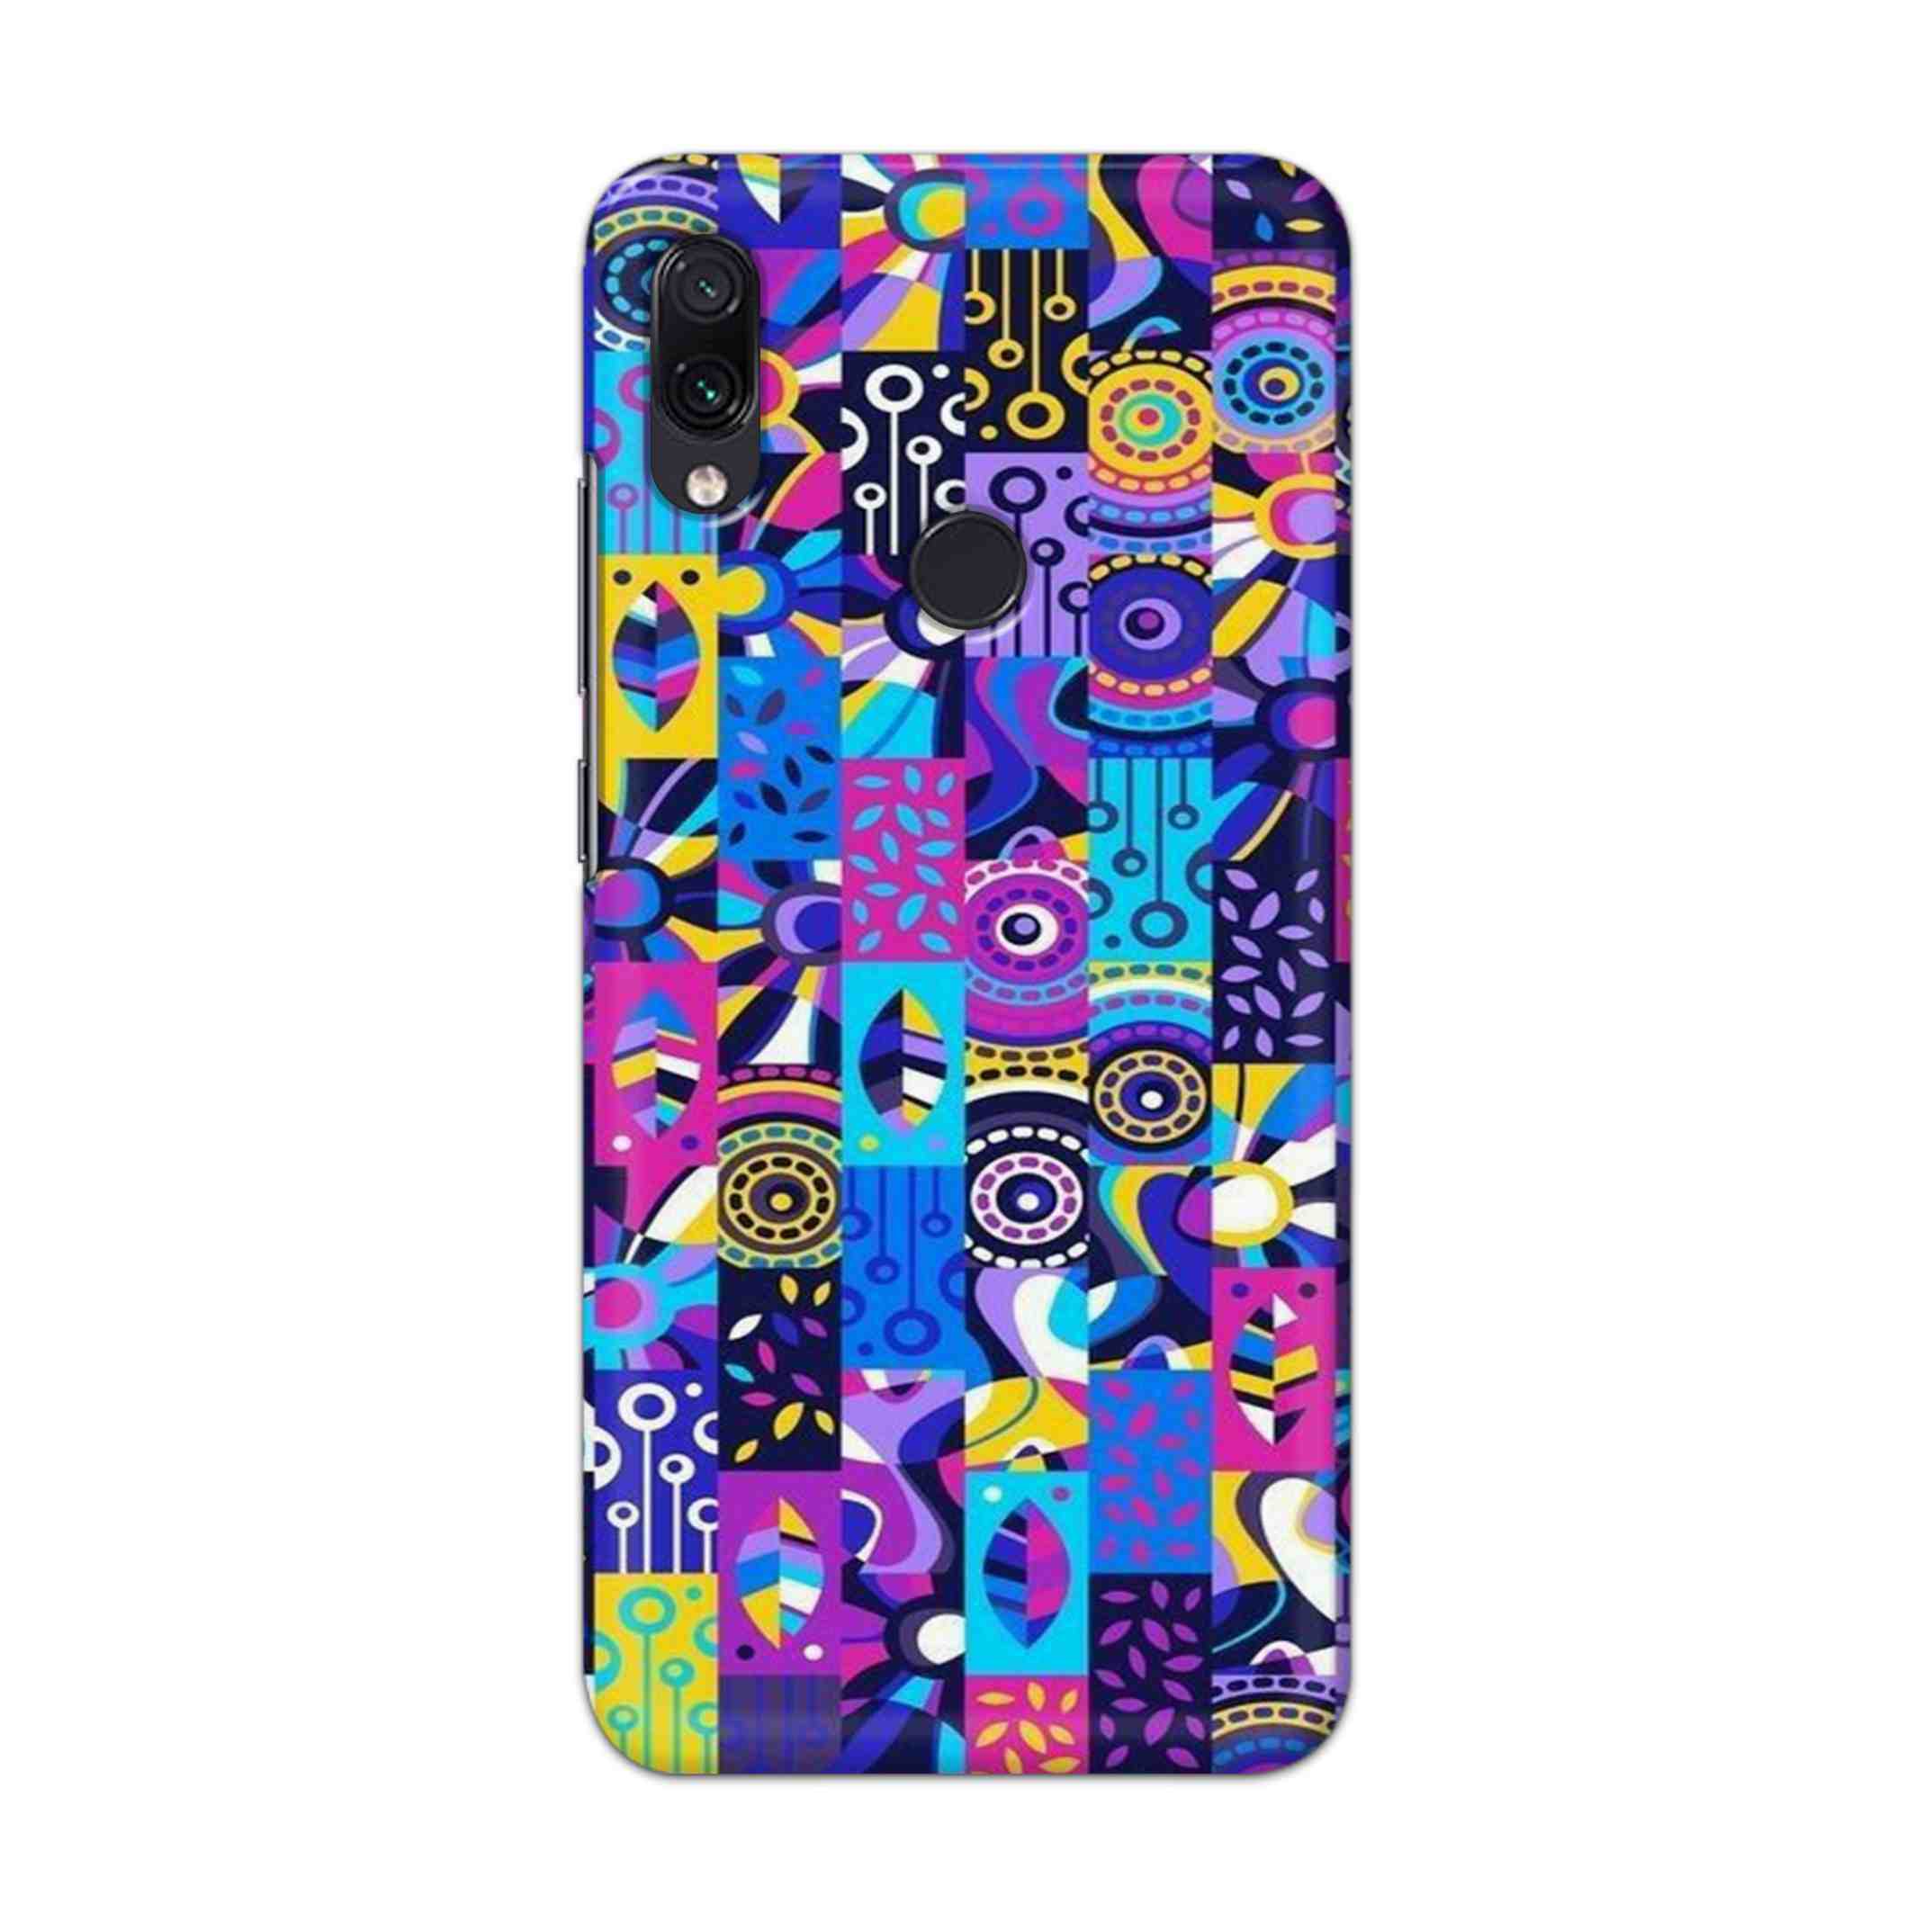 Buy Rainbow Art Hard Back Mobile Phone Case Cover For Xiaomi Redmi 7 Online